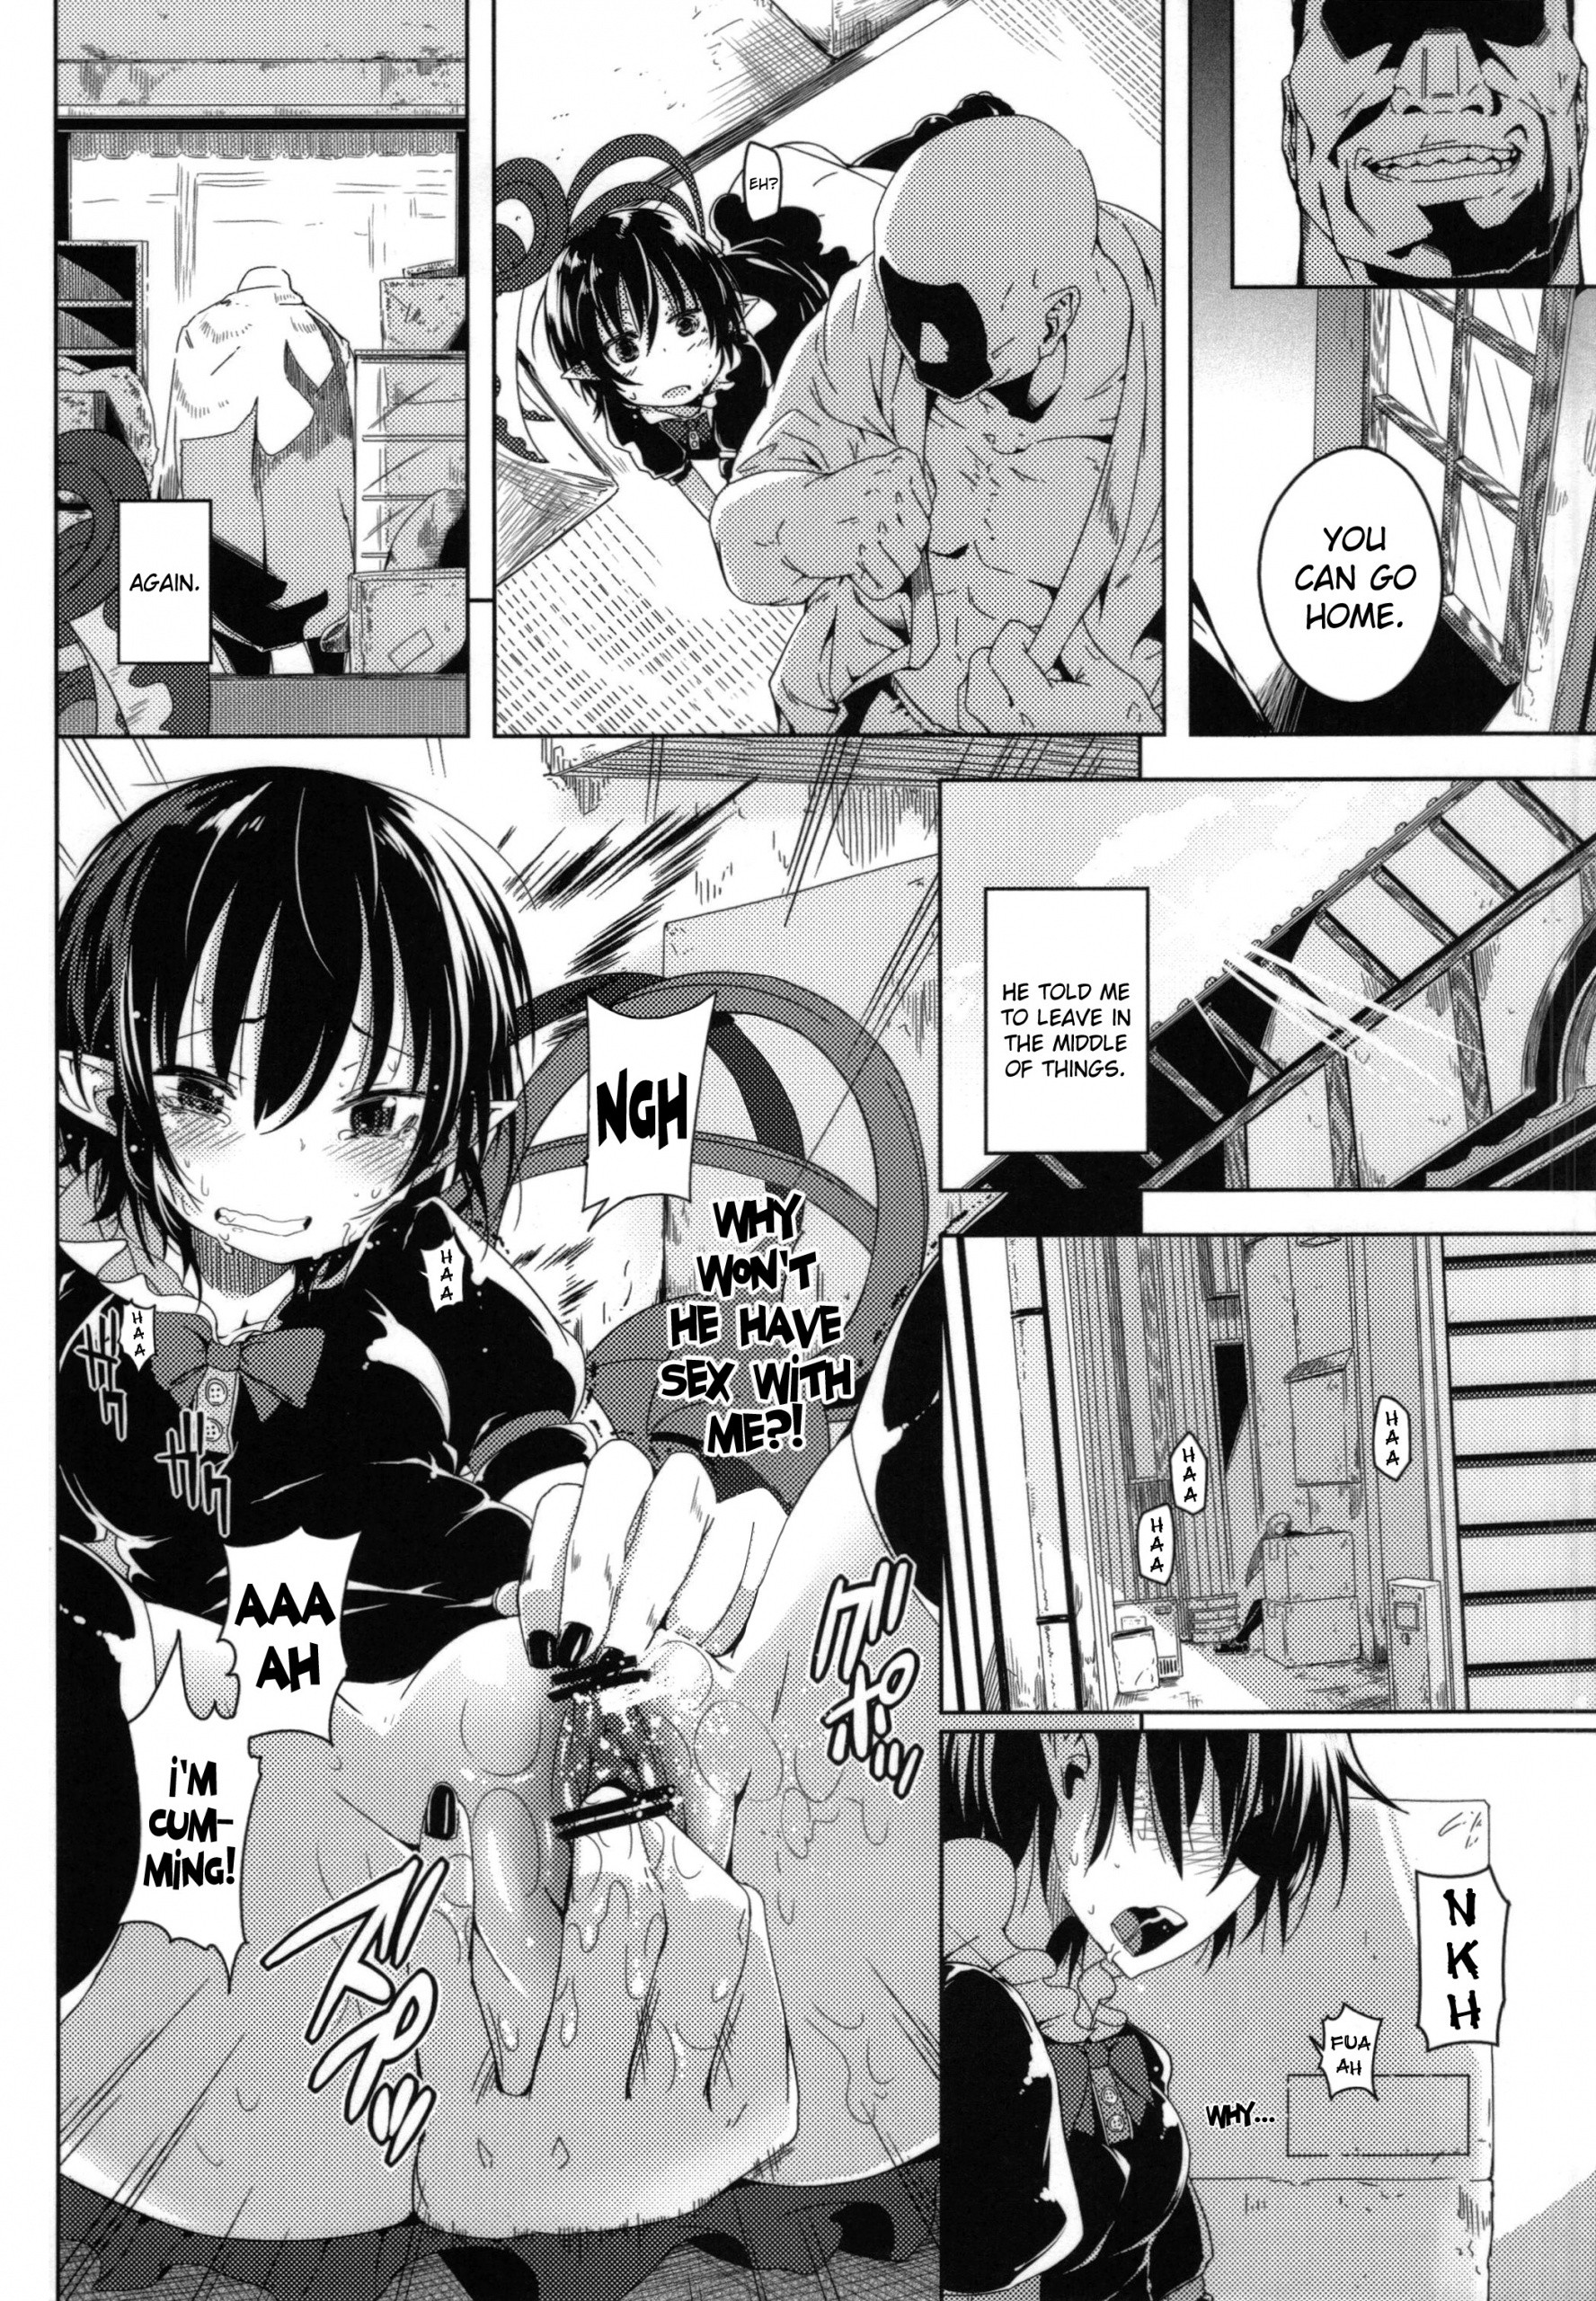 Her Mouth's Lover hentai manga picture 9